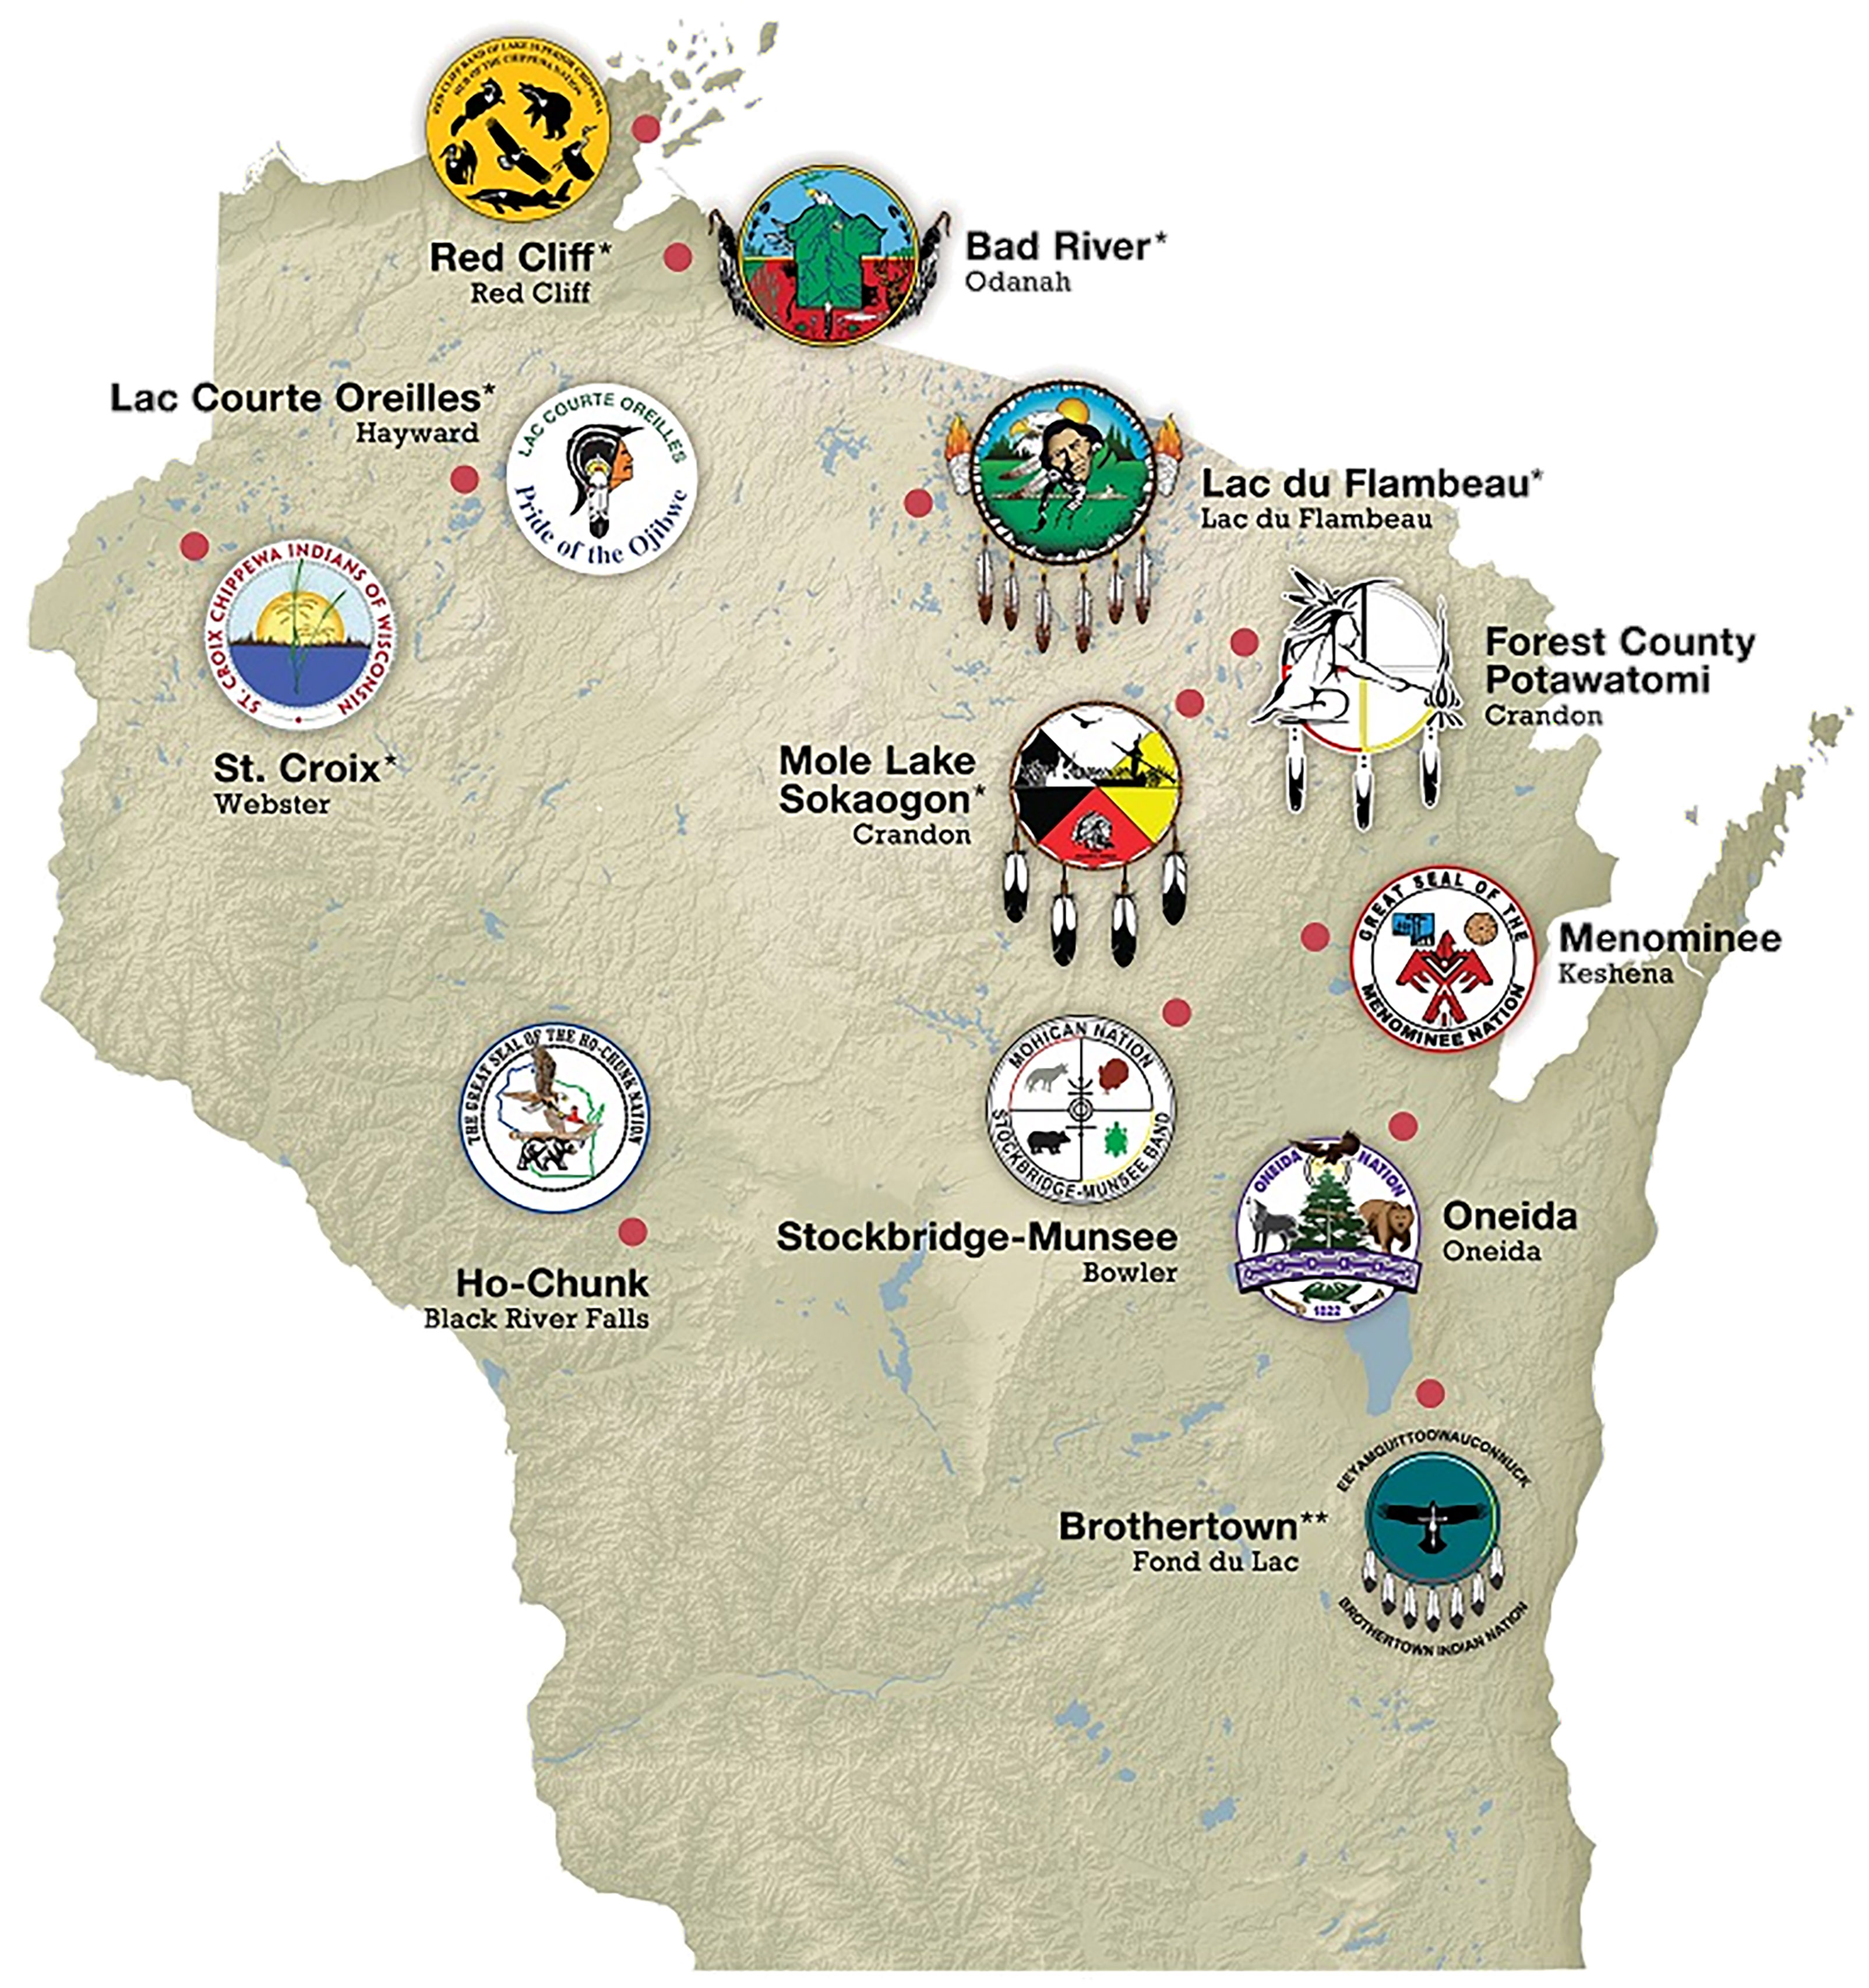 Hear about the 12 Tribes of Wisconsin at the Fond du Lac Public Library